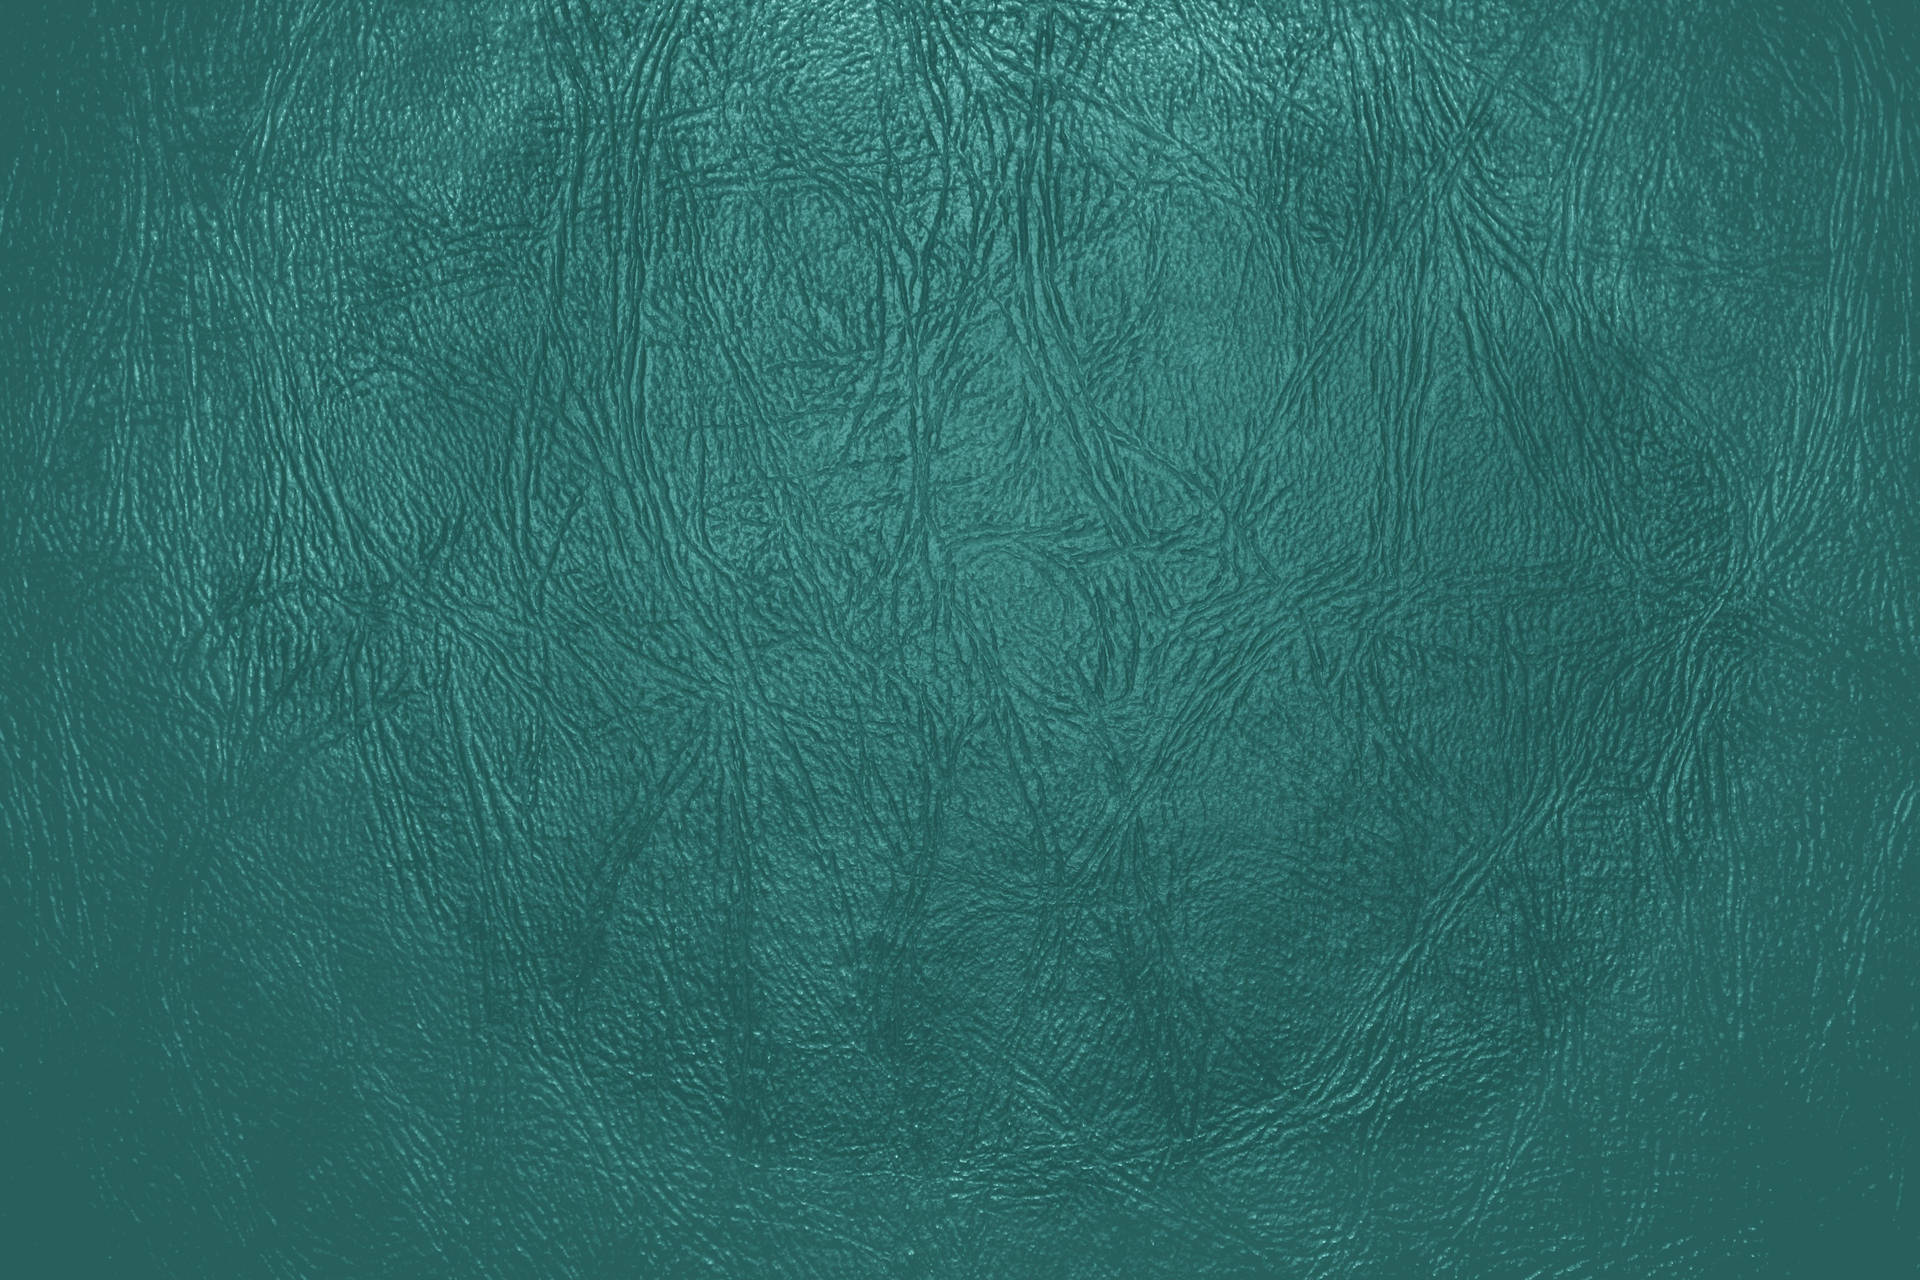 Teal Leather Texture